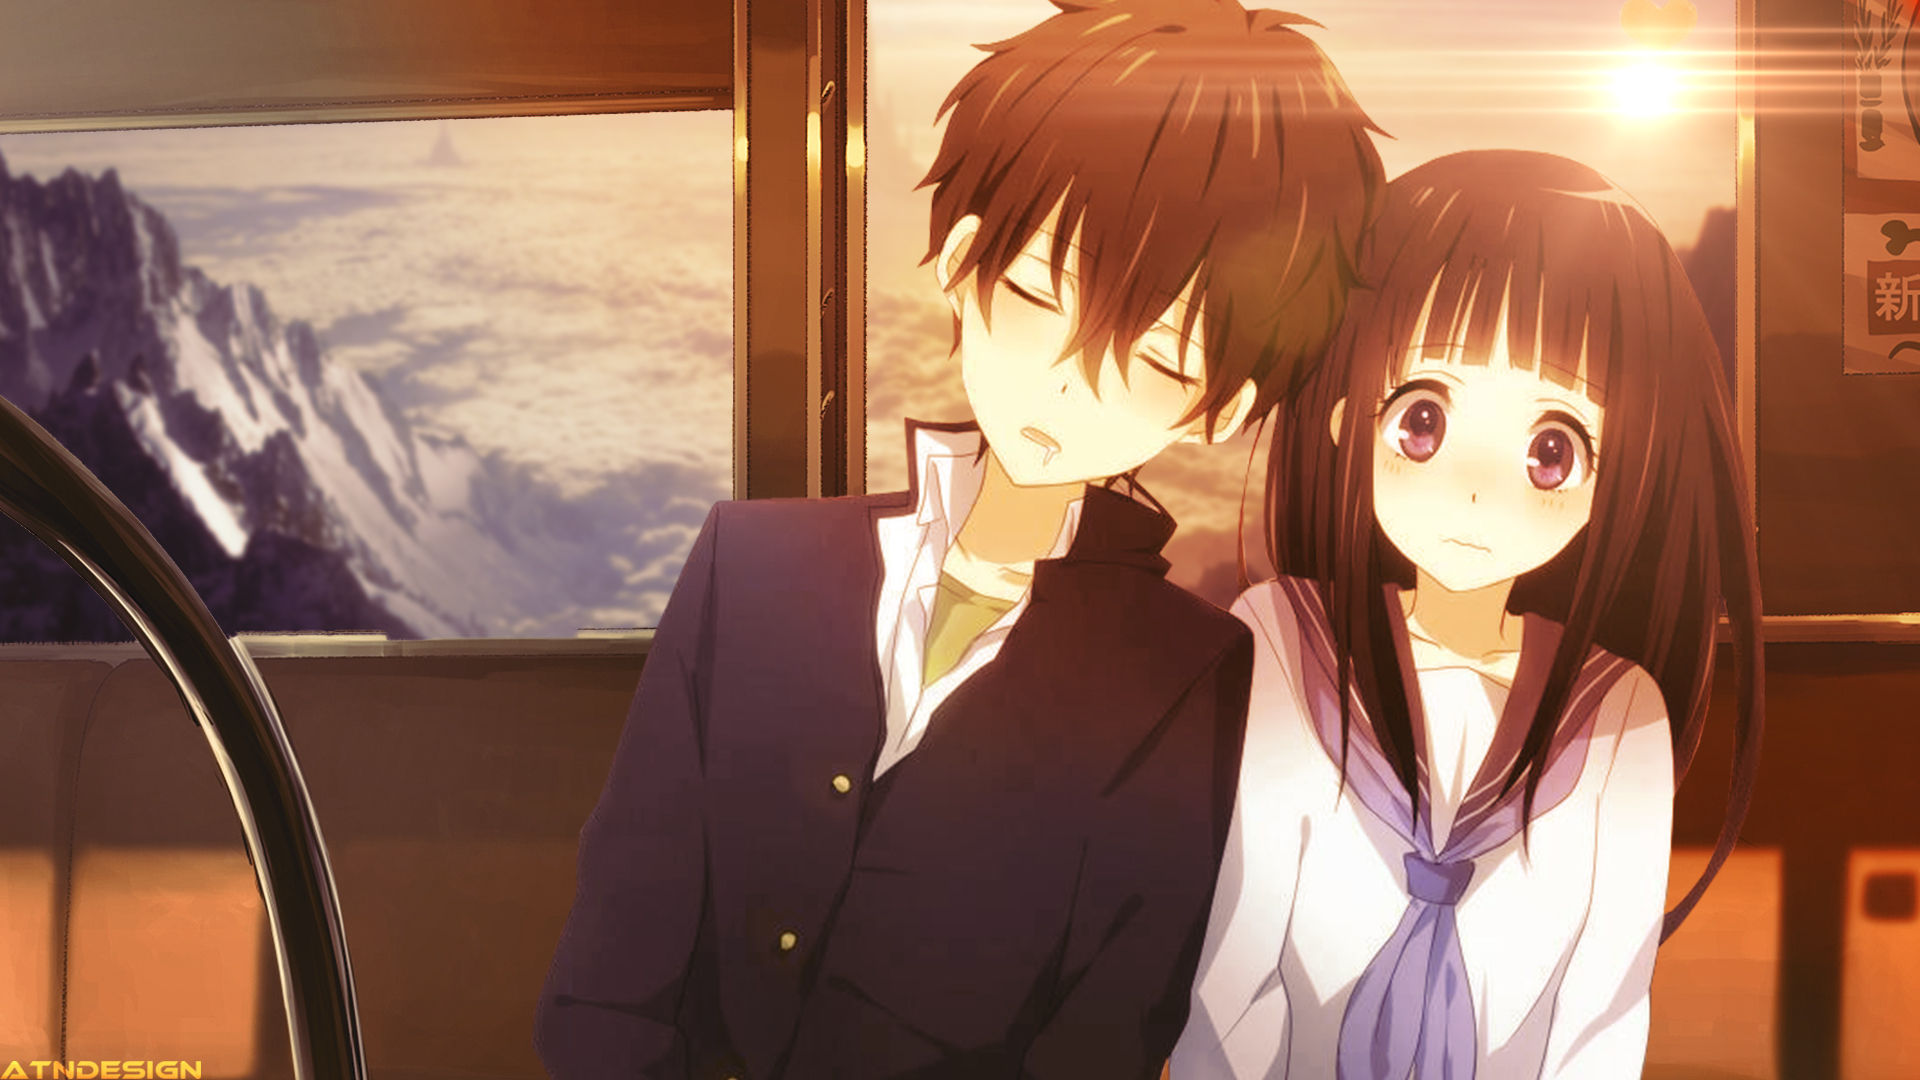 Beautiful Anime Couple Wallpaper HD Images One HD